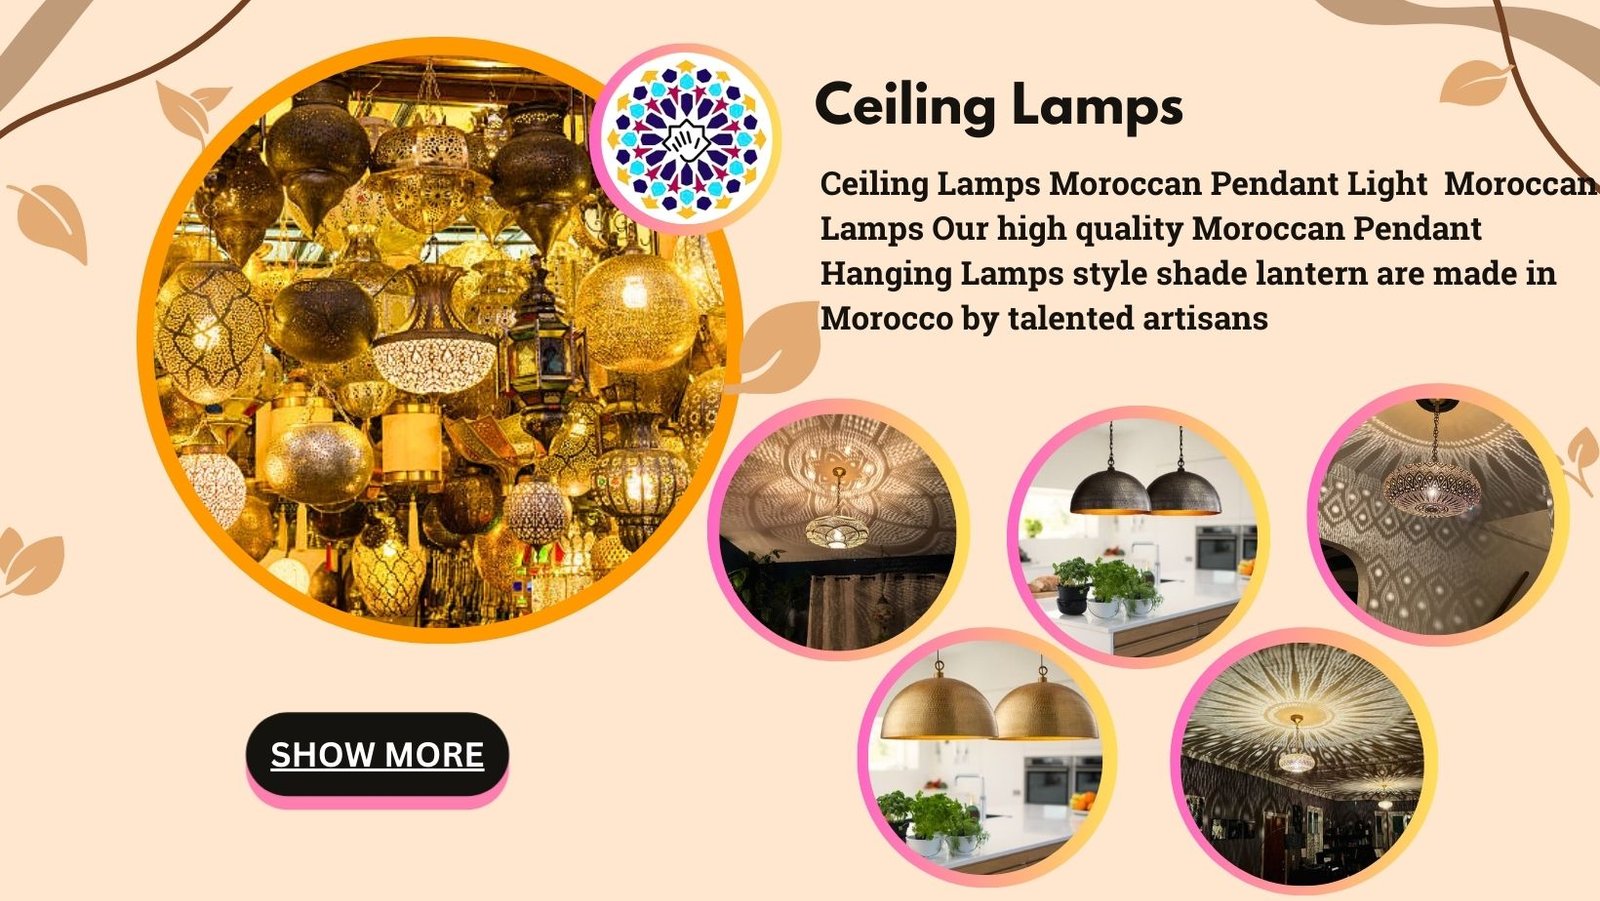 Ceiling Lamps Moroccan Pendant Light Moroccan Lamps Our high quality Moroccan Pendant Hanging Lamps style shade lantern are made in Morocco by talented artisans